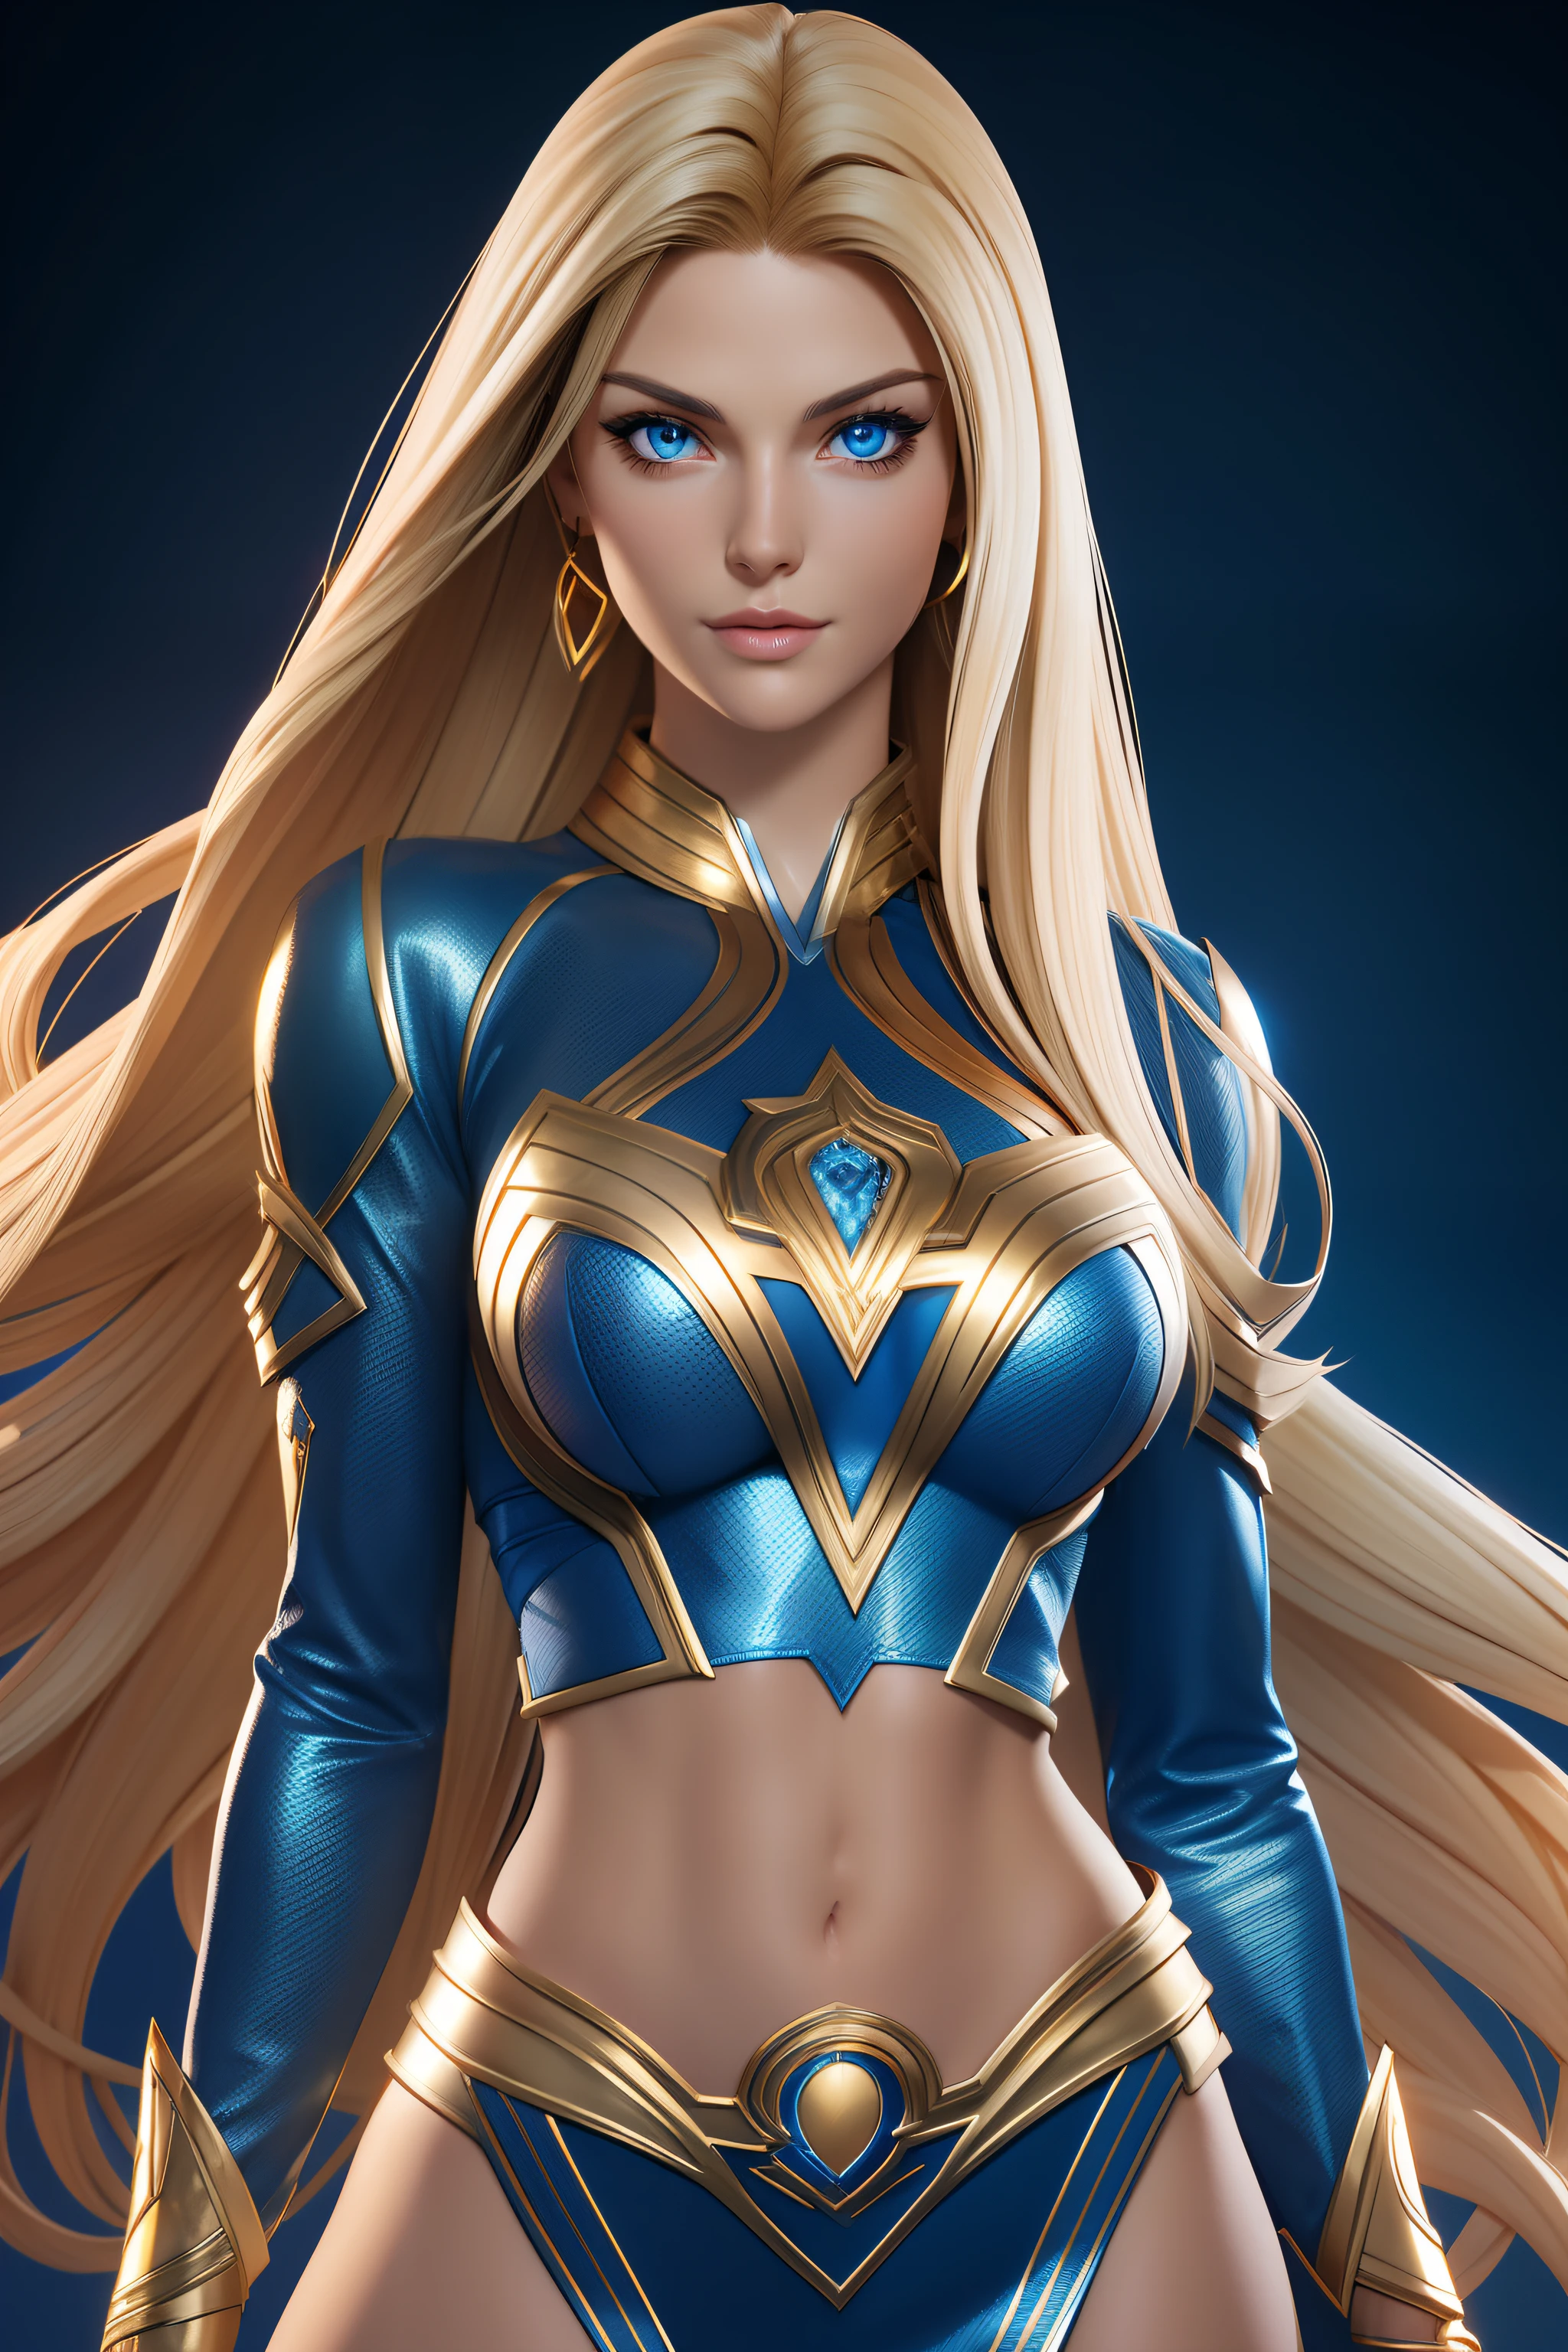 Sexy superheroine long blonde hair glowing blue eyes wears a blue outfit gold shoulder pads gold bracelets revealing abs midriff a Z symbol on her chest portrait photography by artgerm, in the style of realism, glistening skin, cartooncore, mangacore, natural lighting, Defined full lips. Muscular fitness feminine body